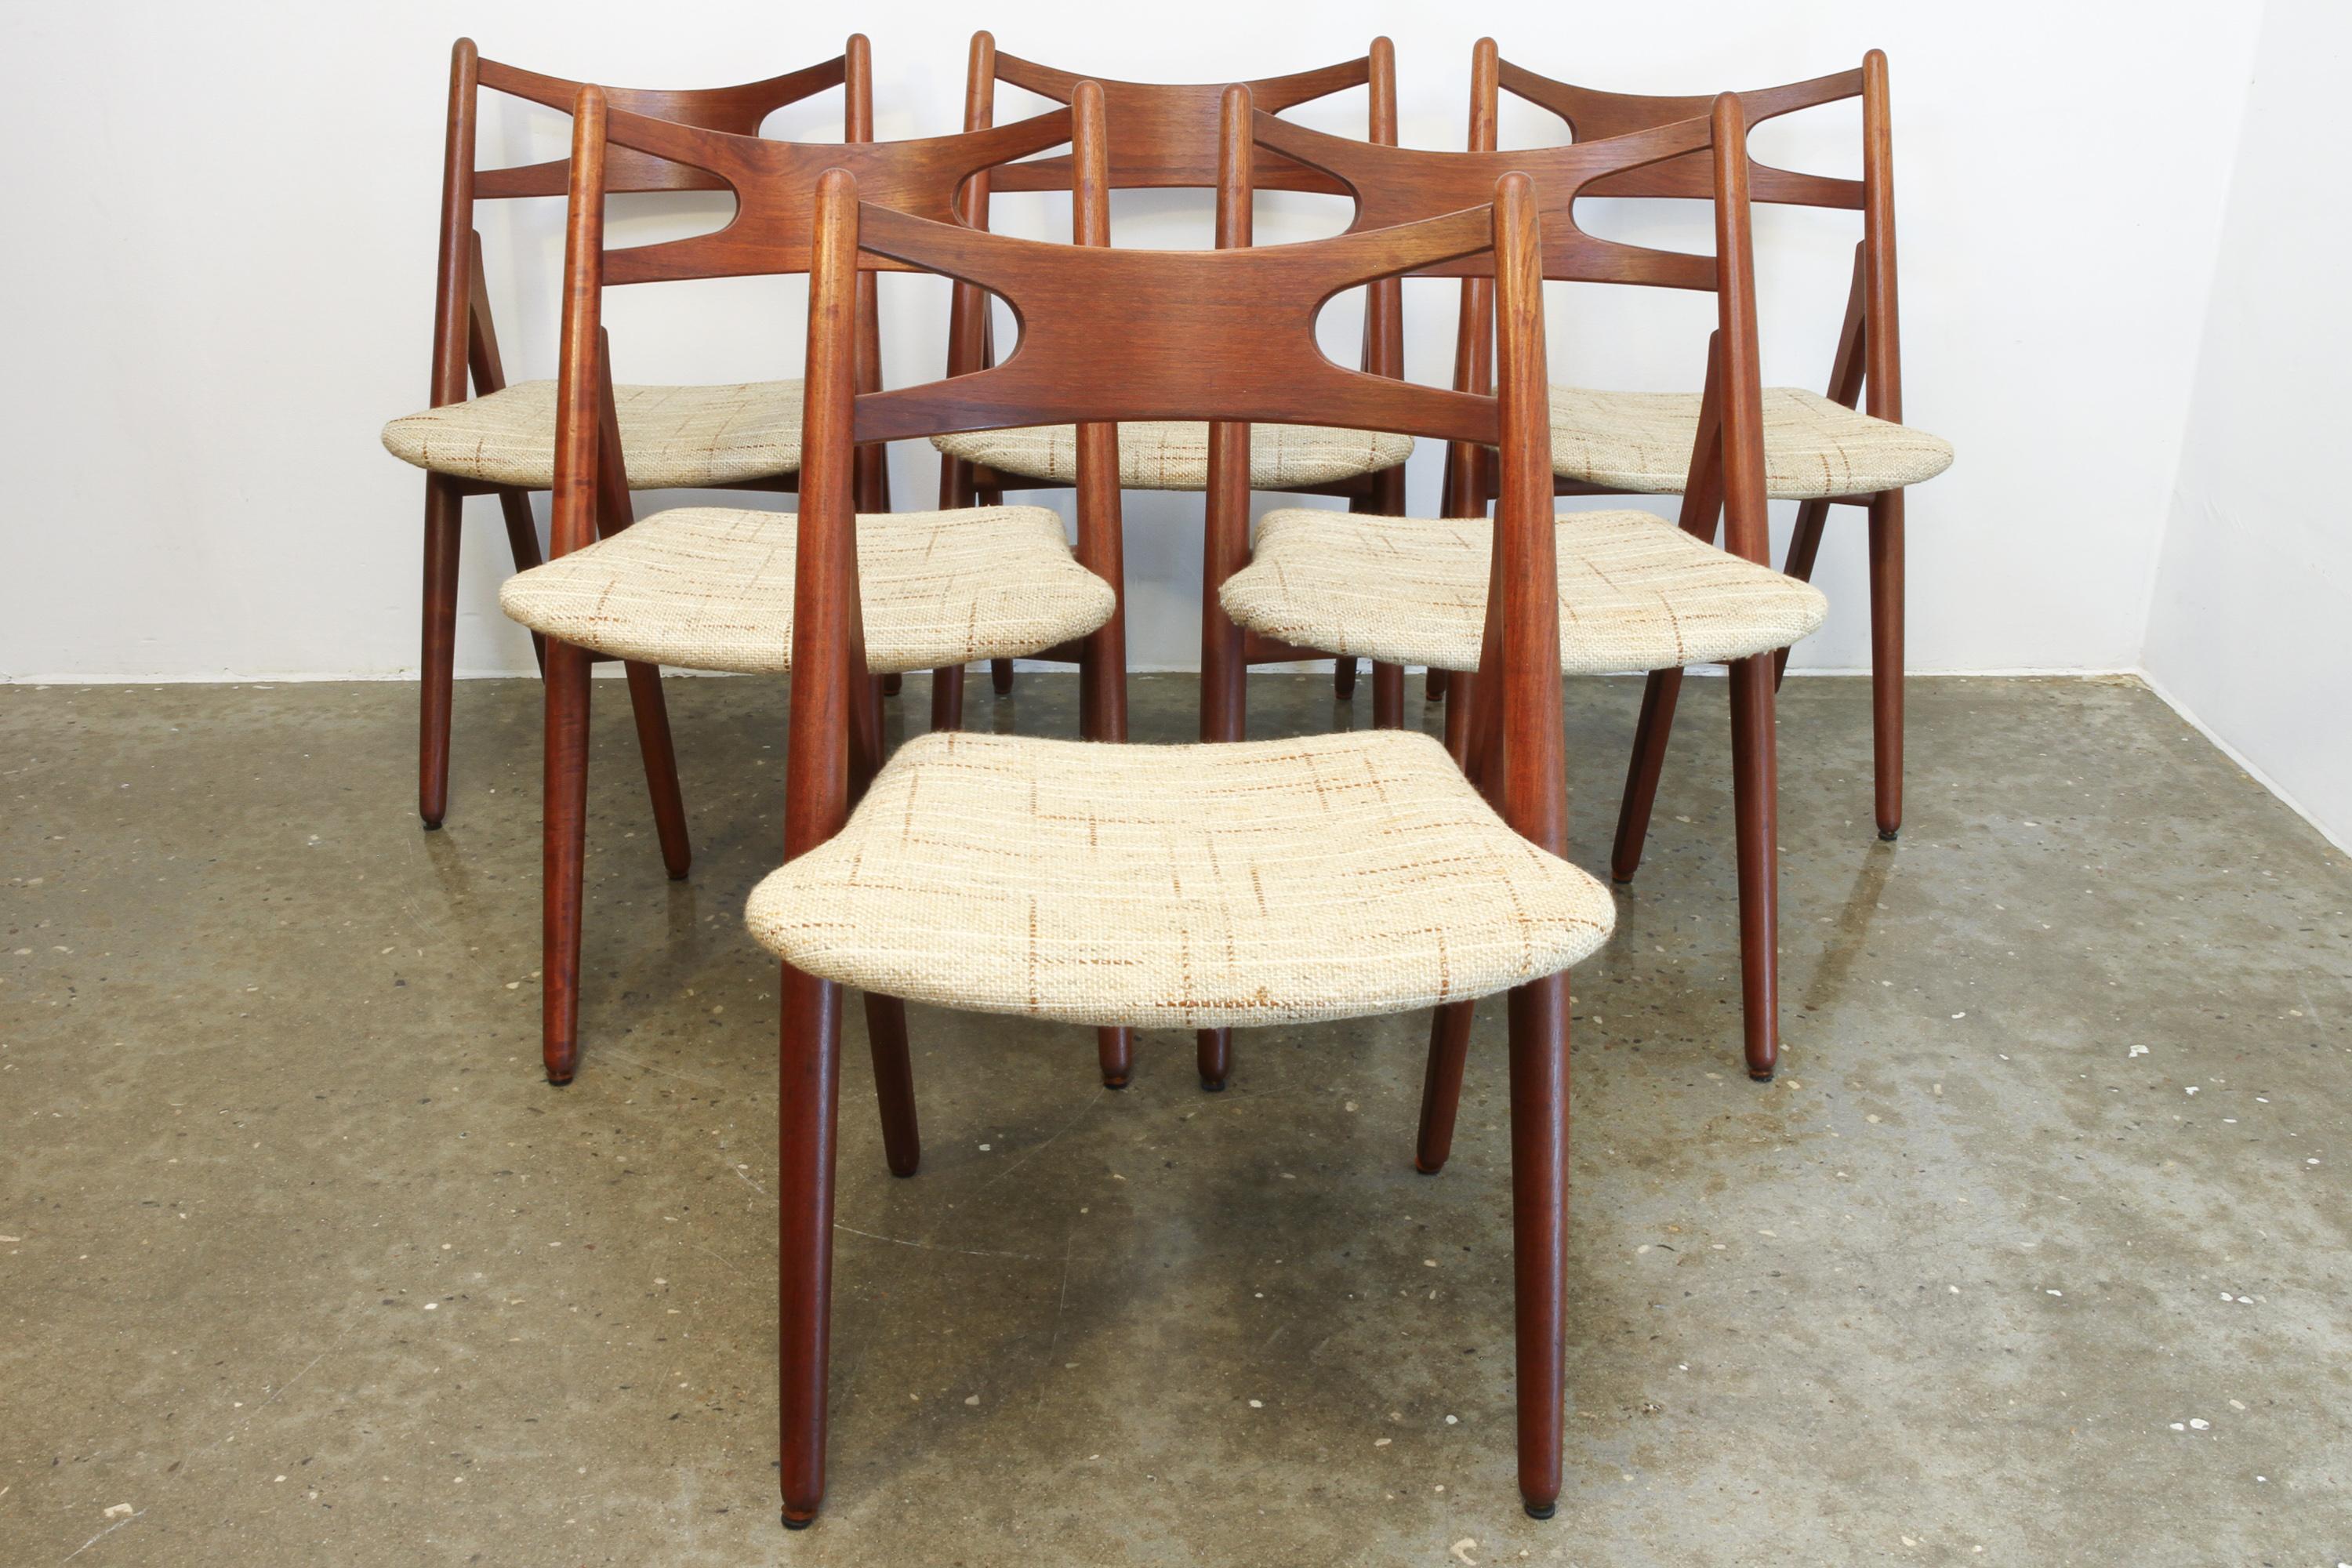 Set of 6 Hans J. Wegner Sawbuck chair CH 29 in teak for Carl Hansen, 1960s
Beautiful set of six danish vintage Wegner CH29 sawbuck dining chairs in solid teak with original vintage upholstery.
Elegantly curved backrests and wide seats makes this